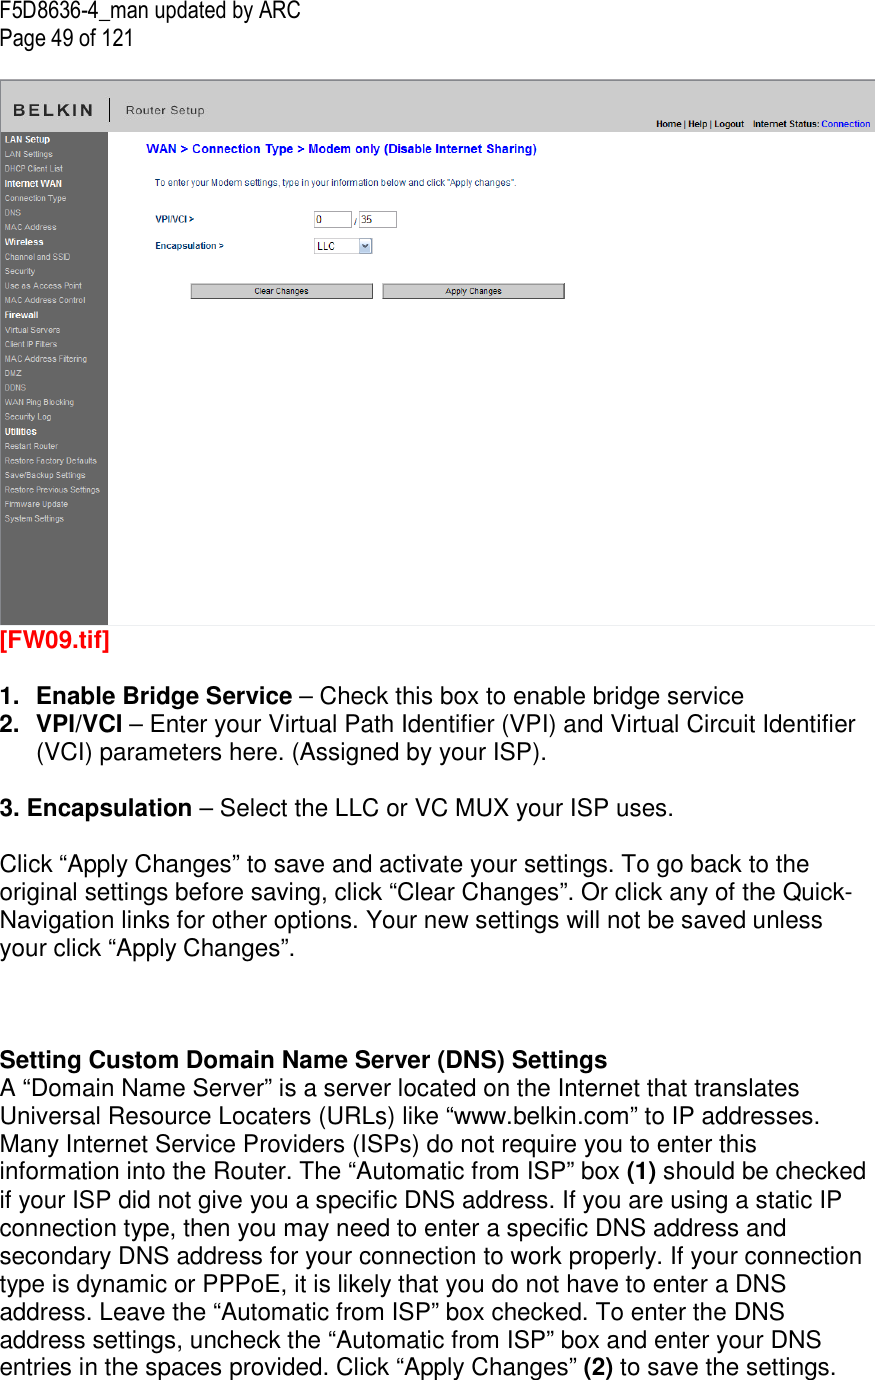 F5D8636-4_man updated by ARC Page 49 of 121   [FW09.tif]  1.  Enable Bridge Service – Check this box to enable bridge service  2.  VPI/VCI – Enter your Virtual Path Identifier (VPI) and Virtual Circuit Identifier (VCI) parameters here. (Assigned by your ISP).   3. Encapsulation – Select the LLC or VC MUX your ISP uses.  Click “Apply Changes” to save and activate your settings. To go back to the original settings before saving, click “Clear Changes”. Or click any of the Quick-Navigation links for other options. Your new settings will not be saved unless your click “Apply Changes”.    Setting Custom Domain Name Server (DNS) Settings A “Domain Name Server” is a server located on the Internet that translates Universal Resource Locaters (URLs) like “www.belkin.com” to IP addresses. Many Internet Service Providers (ISPs) do not require you to enter this information into the Router. The “Automatic from ISP” box (1) should be checked if your ISP did not give you a specific DNS address. If you are using a static IP connection type, then you may need to enter a specific DNS address and secondary DNS address for your connection to work properly. If your connection type is dynamic or PPPoE, it is likely that you do not have to enter a DNS address. Leave the “Automatic from ISP” box checked. To enter the DNS address settings, uncheck the “Automatic from ISP” box and enter your DNS entries in the spaces provided. Click “Apply Changes” (2) to save the settings.